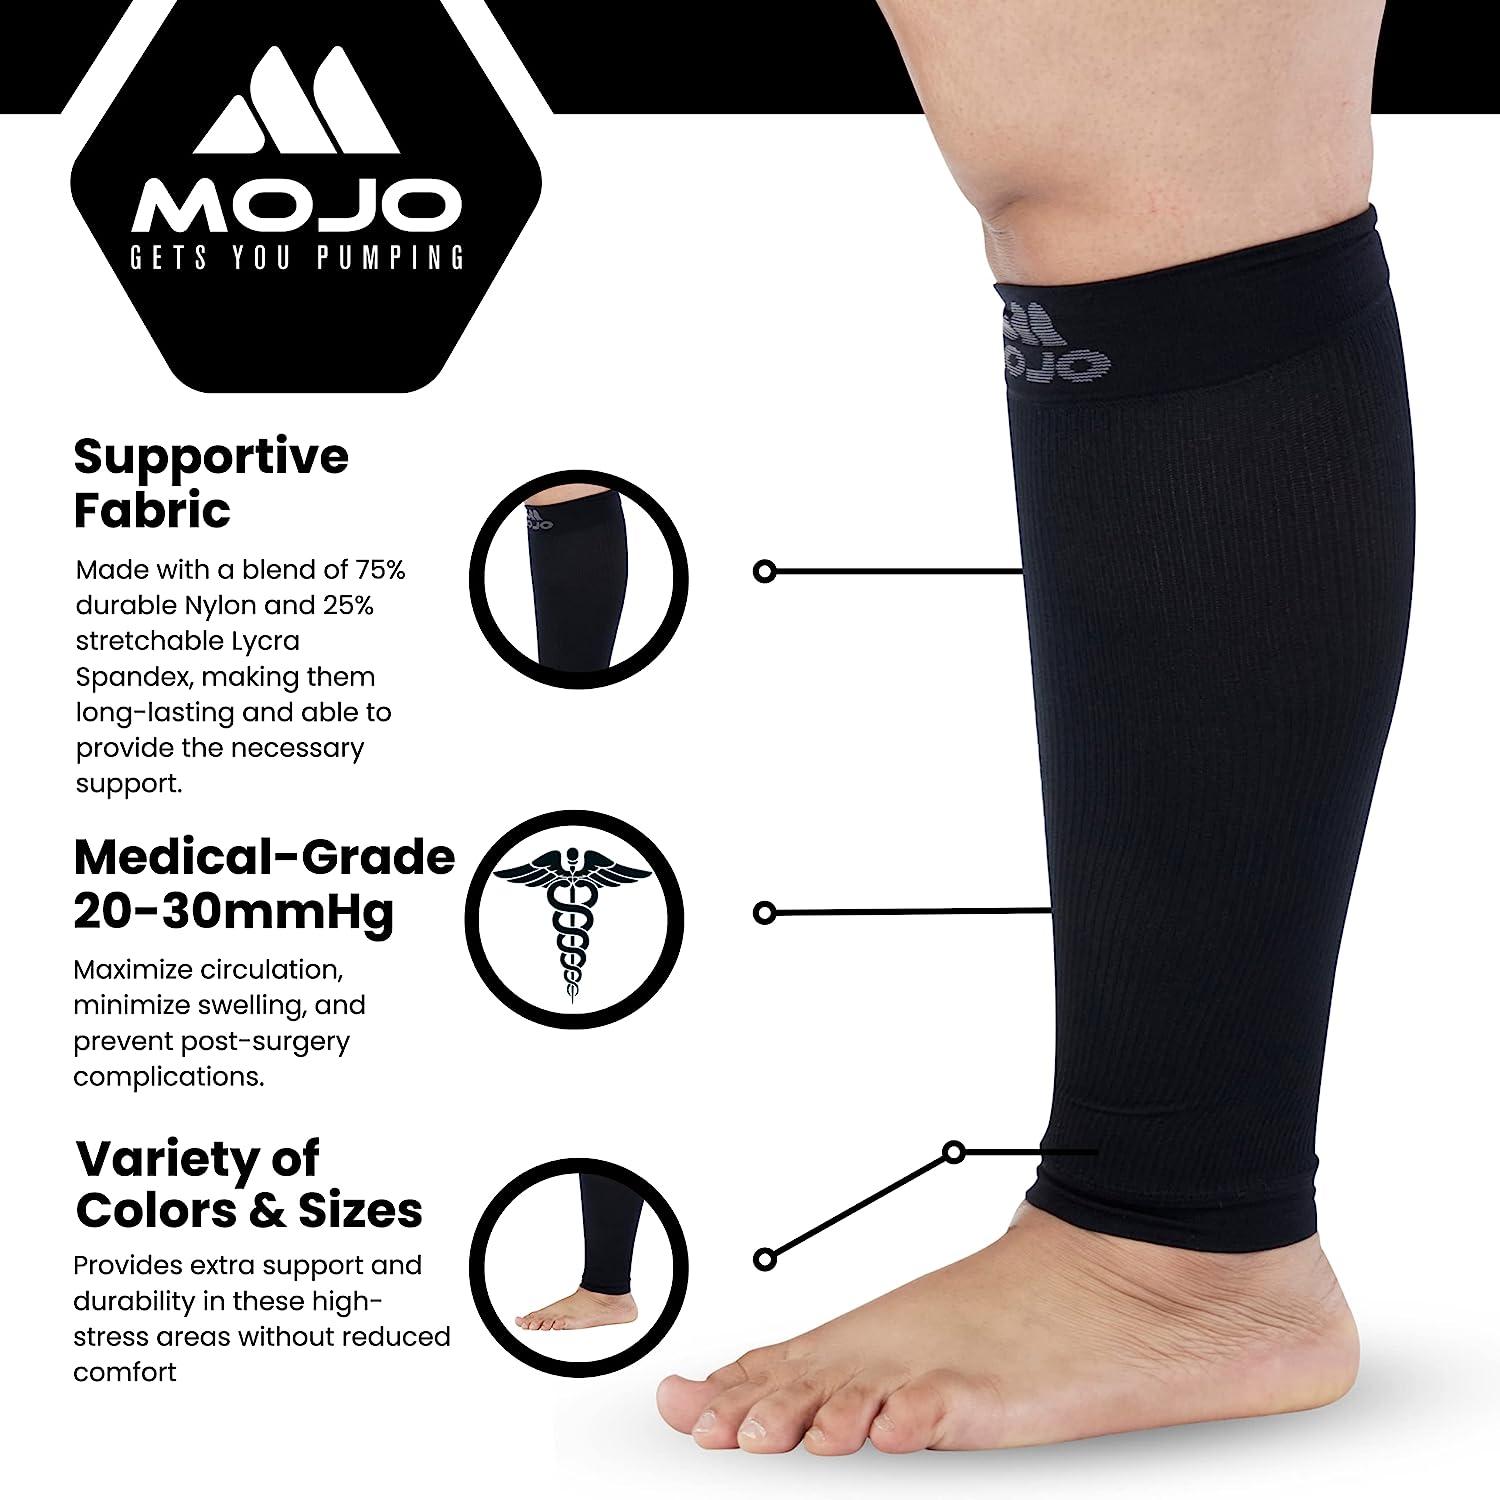 Mojo Compression Socks Graduated Compression Calf Sleeves for Swelling and  Shin Splints Support - Plus Size 20-30mmHg, Small-7XL, Black, White, Pink,  Grey - 1 Pair 5X-Large Black